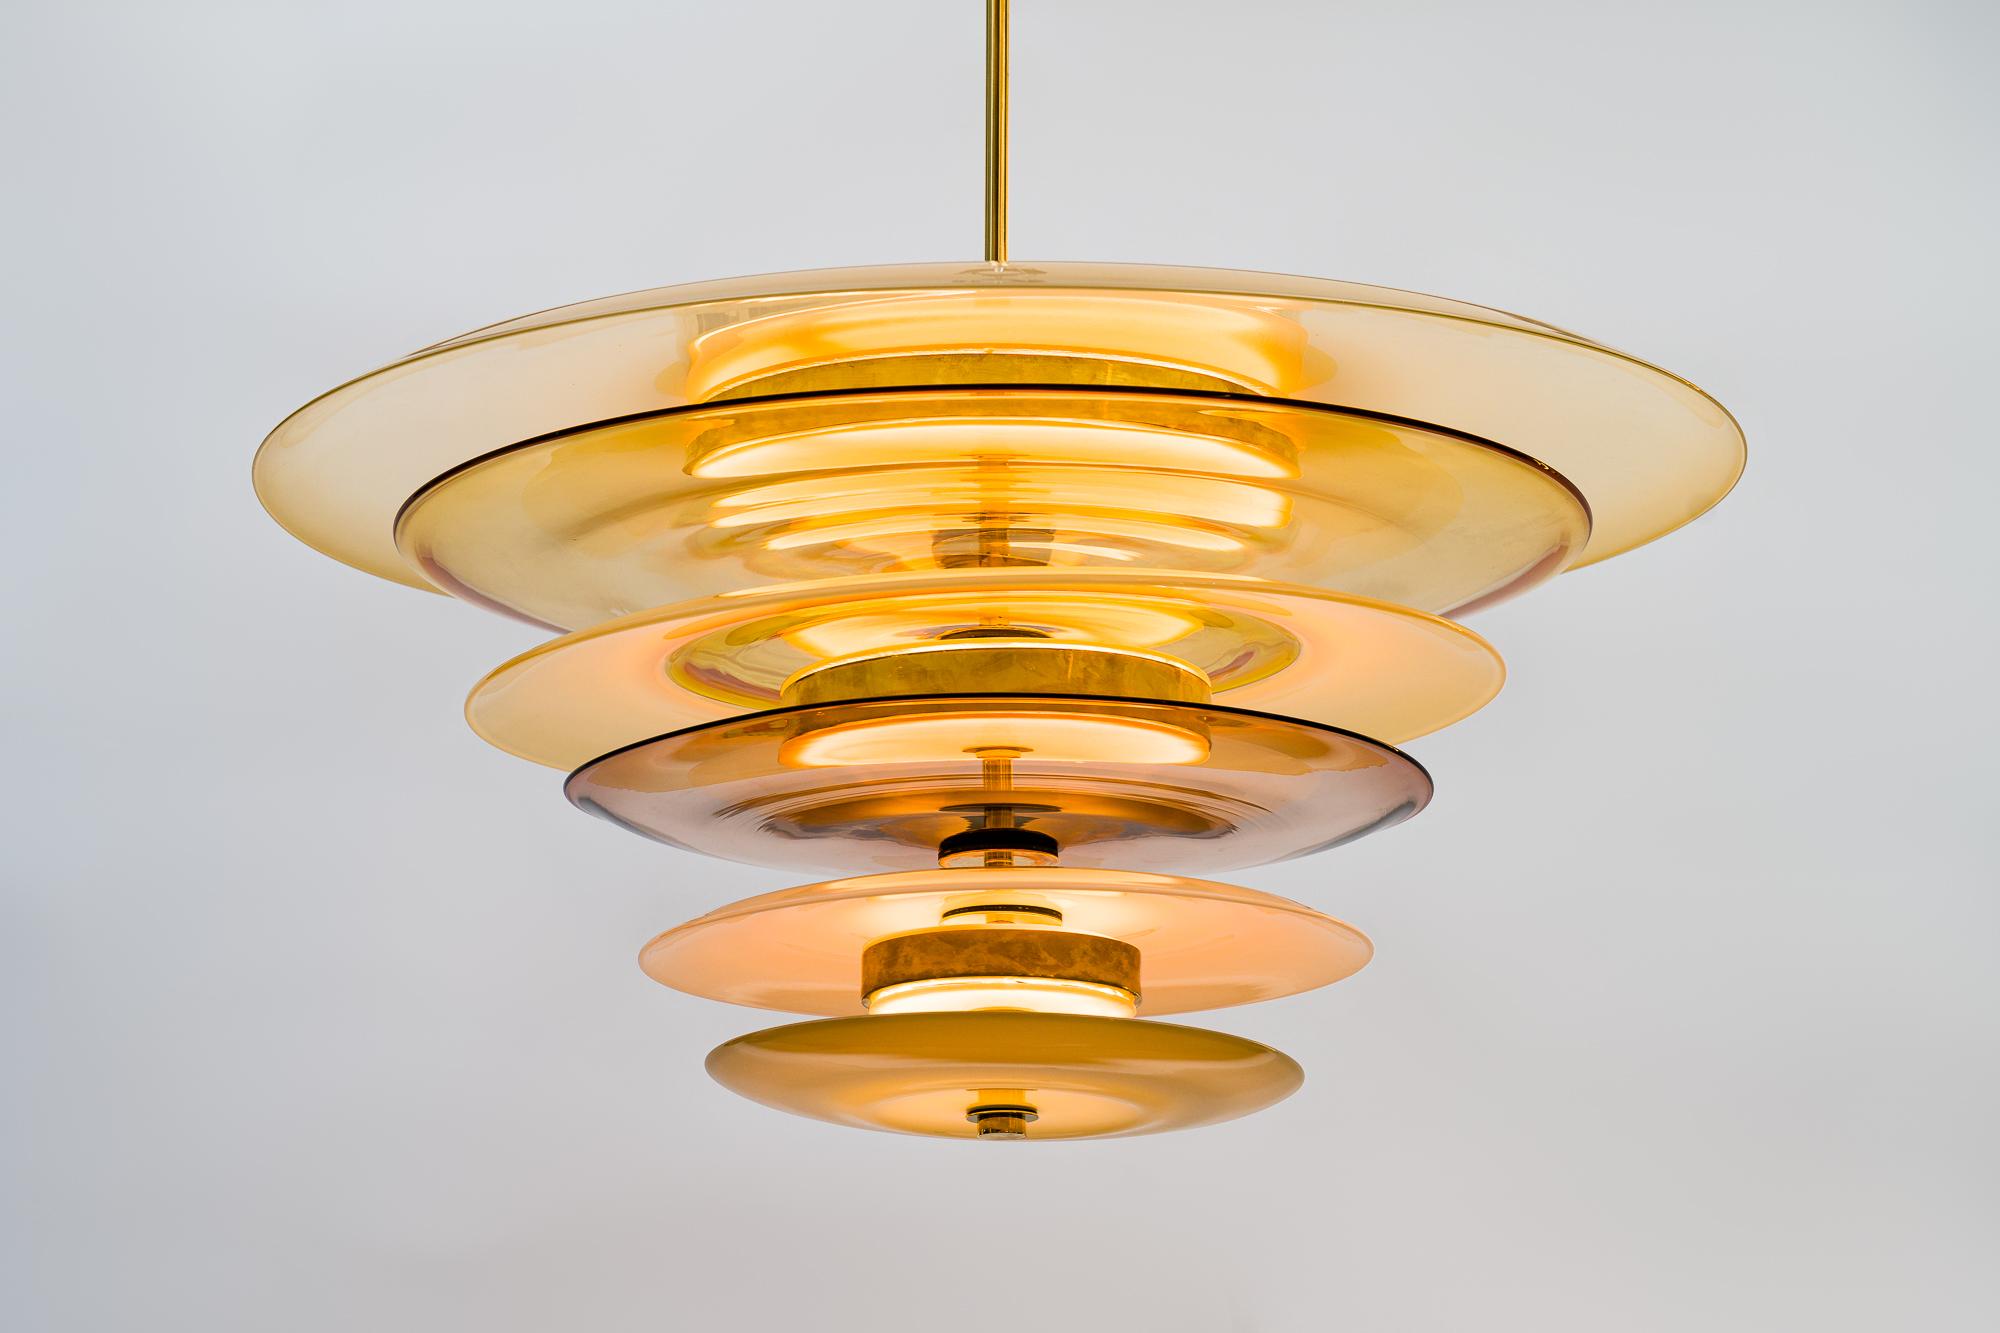 Today in addition to his fine art glass sculptures, Jamie Harris is creating unique, hand-made sculptural lighting. His Nested Disc series plays on layered geometries to create sophisticated lighting structures built from tiered levels of blown